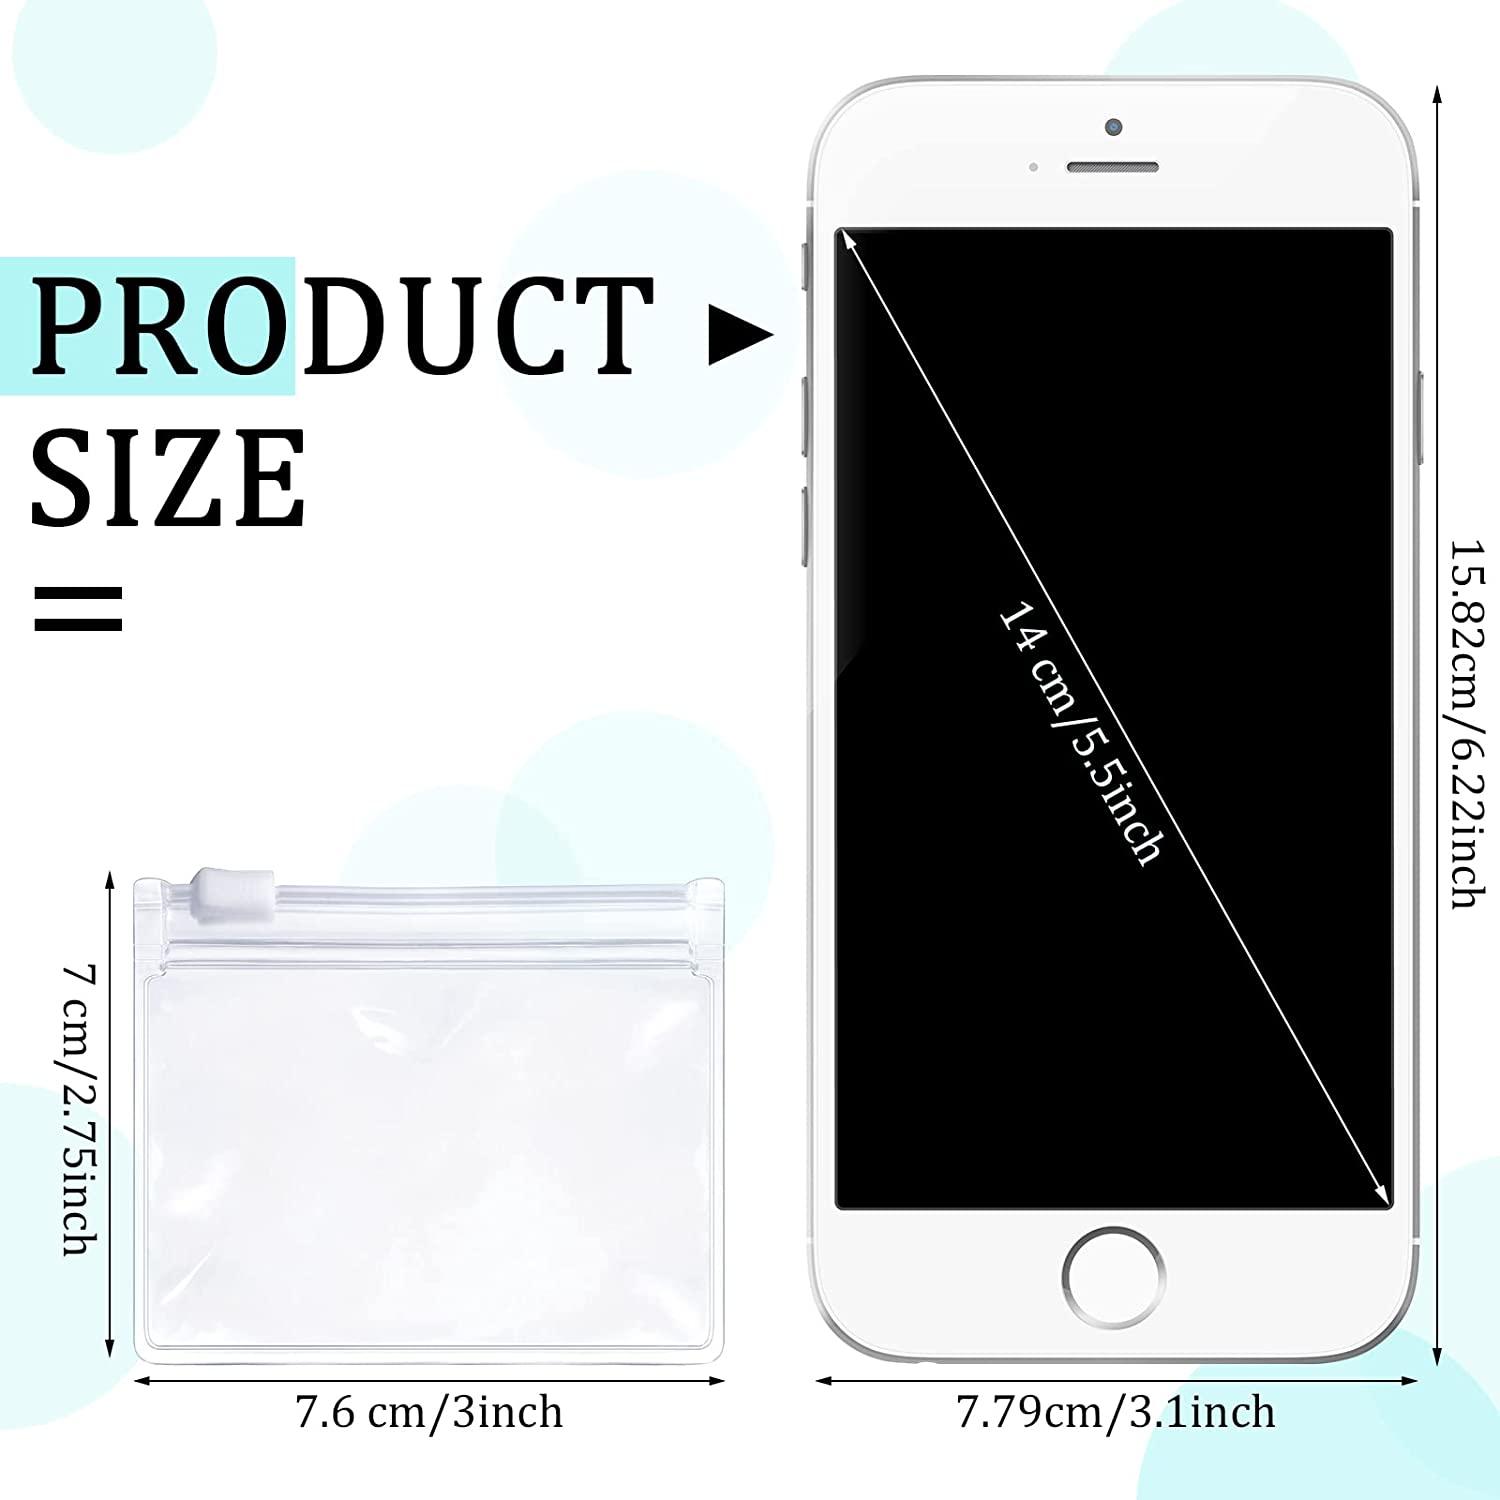 Pill Pouch Bags Zippered Pill Pouch Set Reusable Pill Baggies Clear Plastic  Pill Bags Self Sealing Travel Medicine Organizer Storage Pouches with